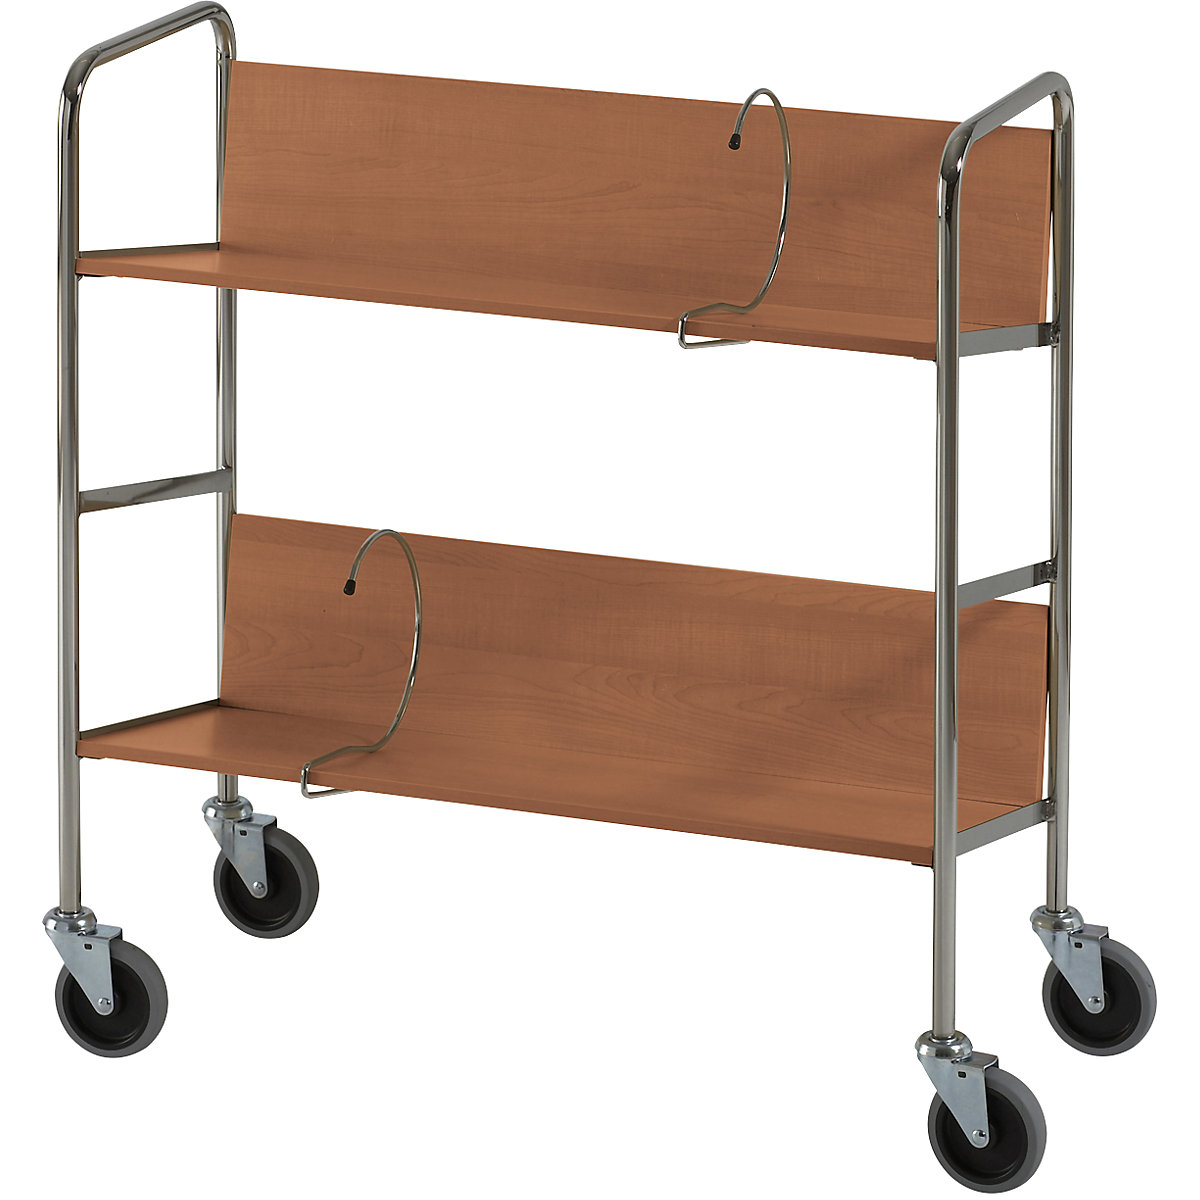 File trolley, chrome plated – HelgeNyberg, 2 shelves, LxWxH 800 x 340 x 840 mm, cherry finish, 5+ items-21